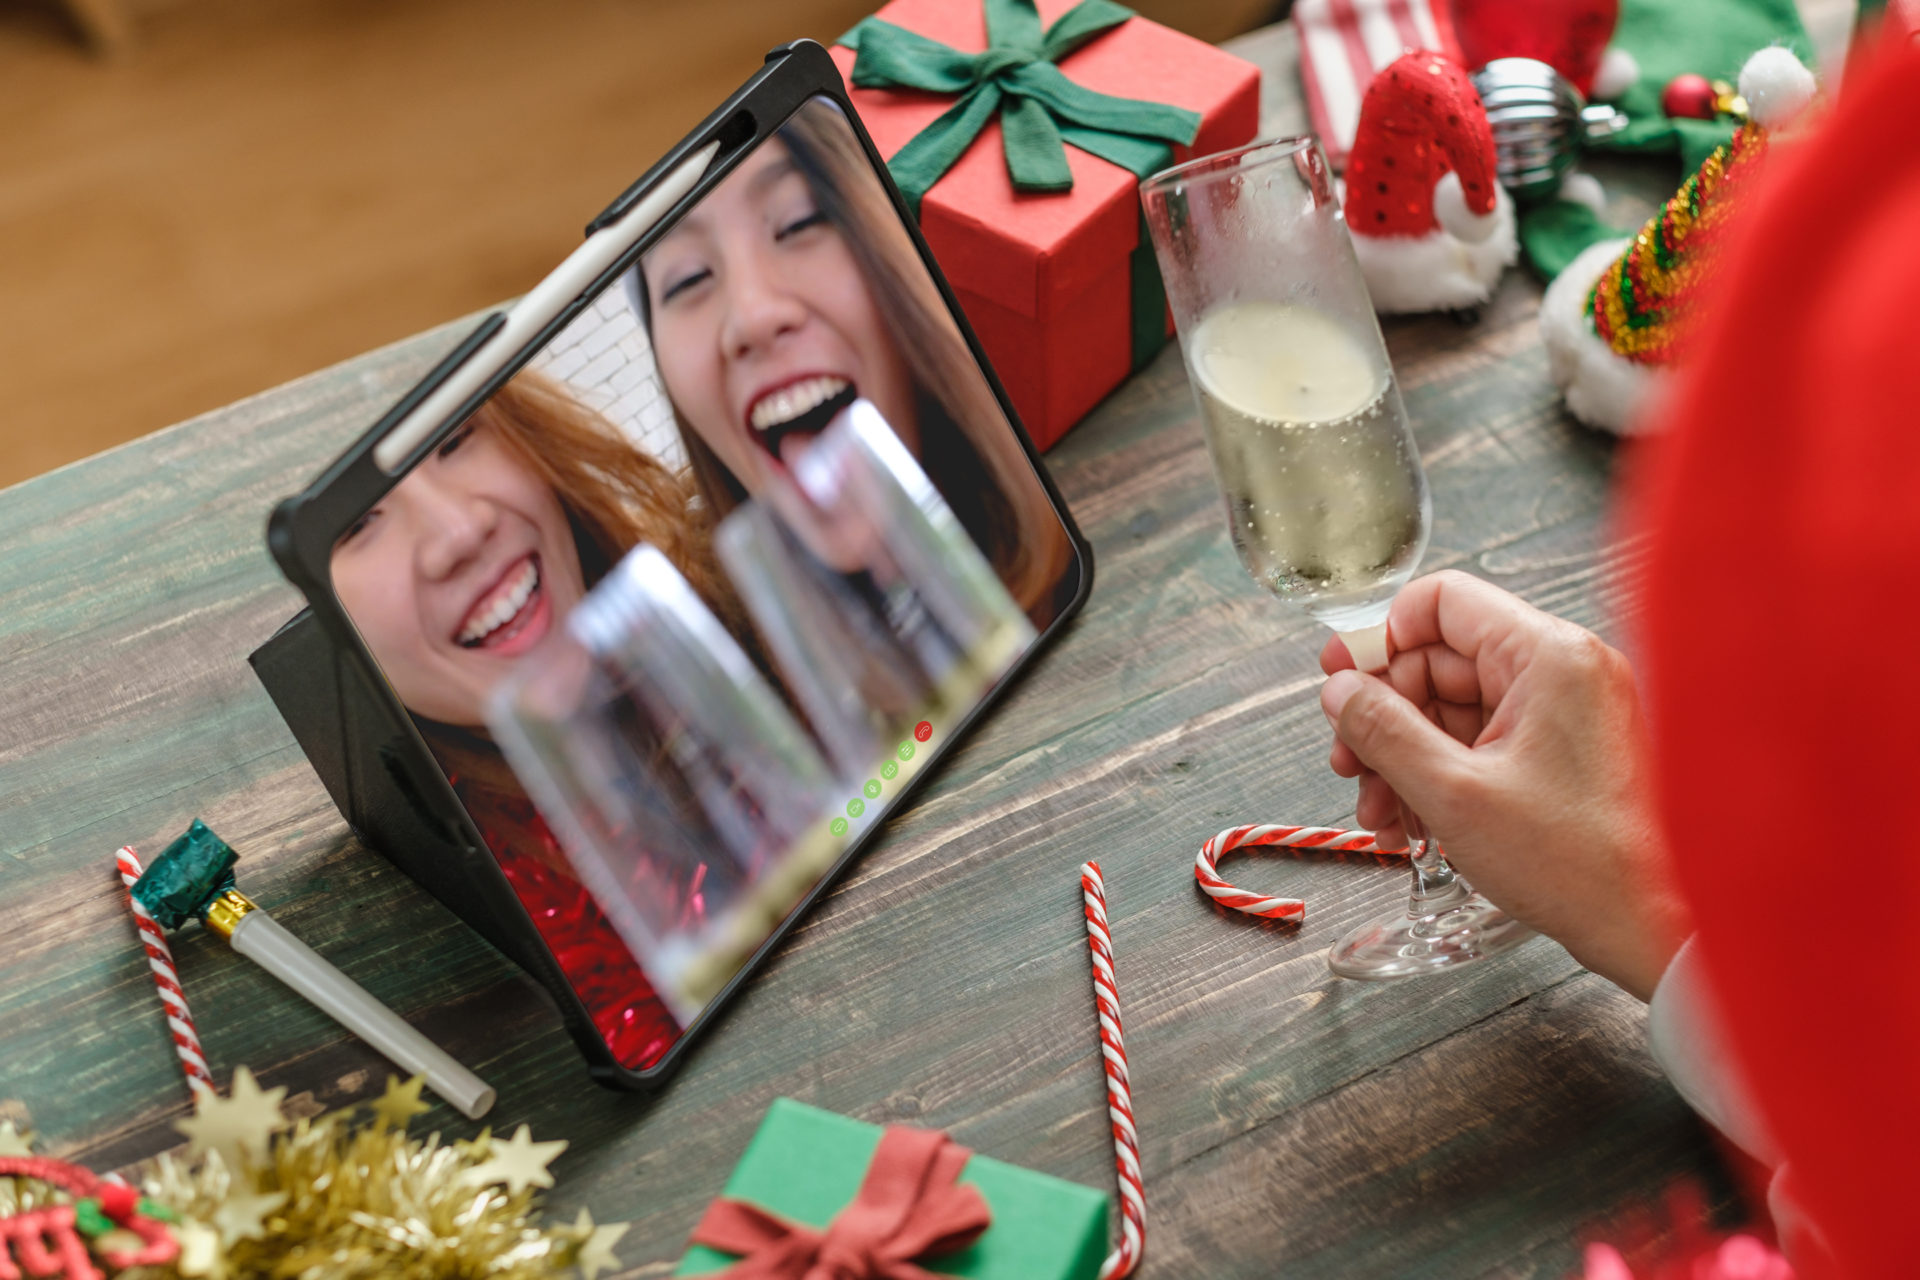 Two smiling women on a video call looking happy with drinks and a woman talking on call with a glass of champagne